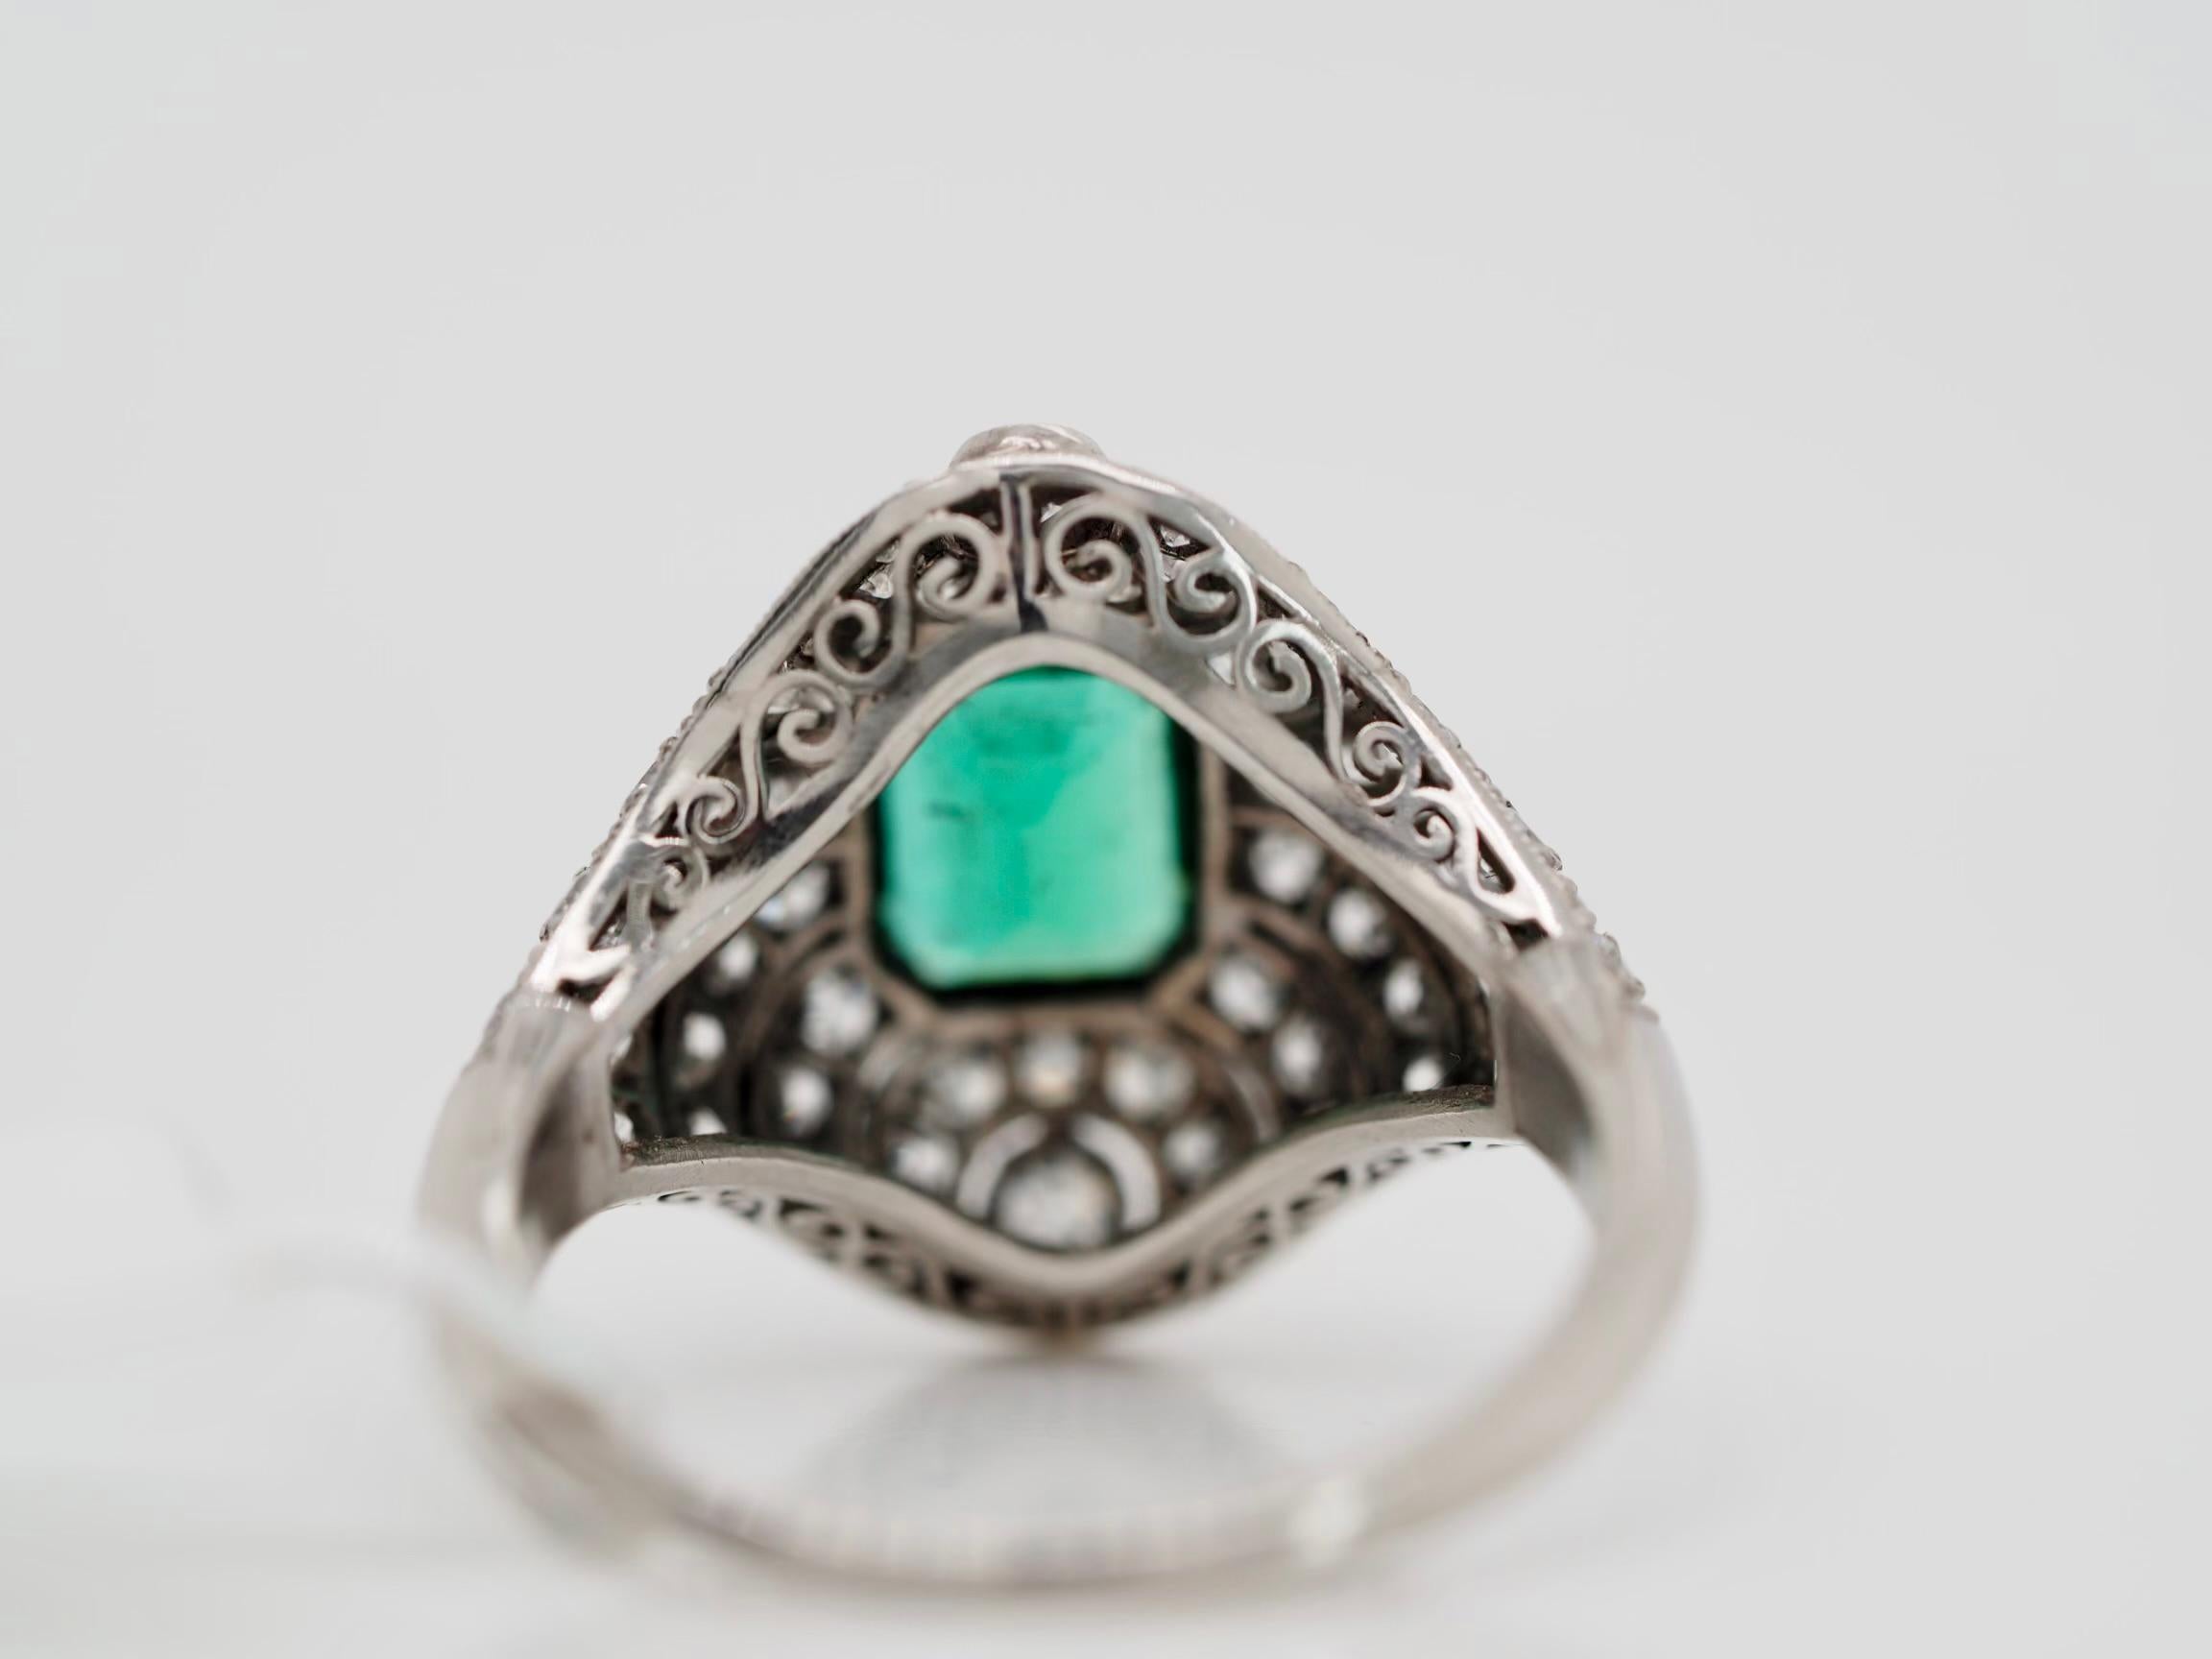 This stunning vintage one of a kind ring, is a must have for cocktail's. It has a beautiful natural emerald, that brings this ring together. Enhanced with diamonds surrounding the emerald, following the intricate pattern. You will not see this ring